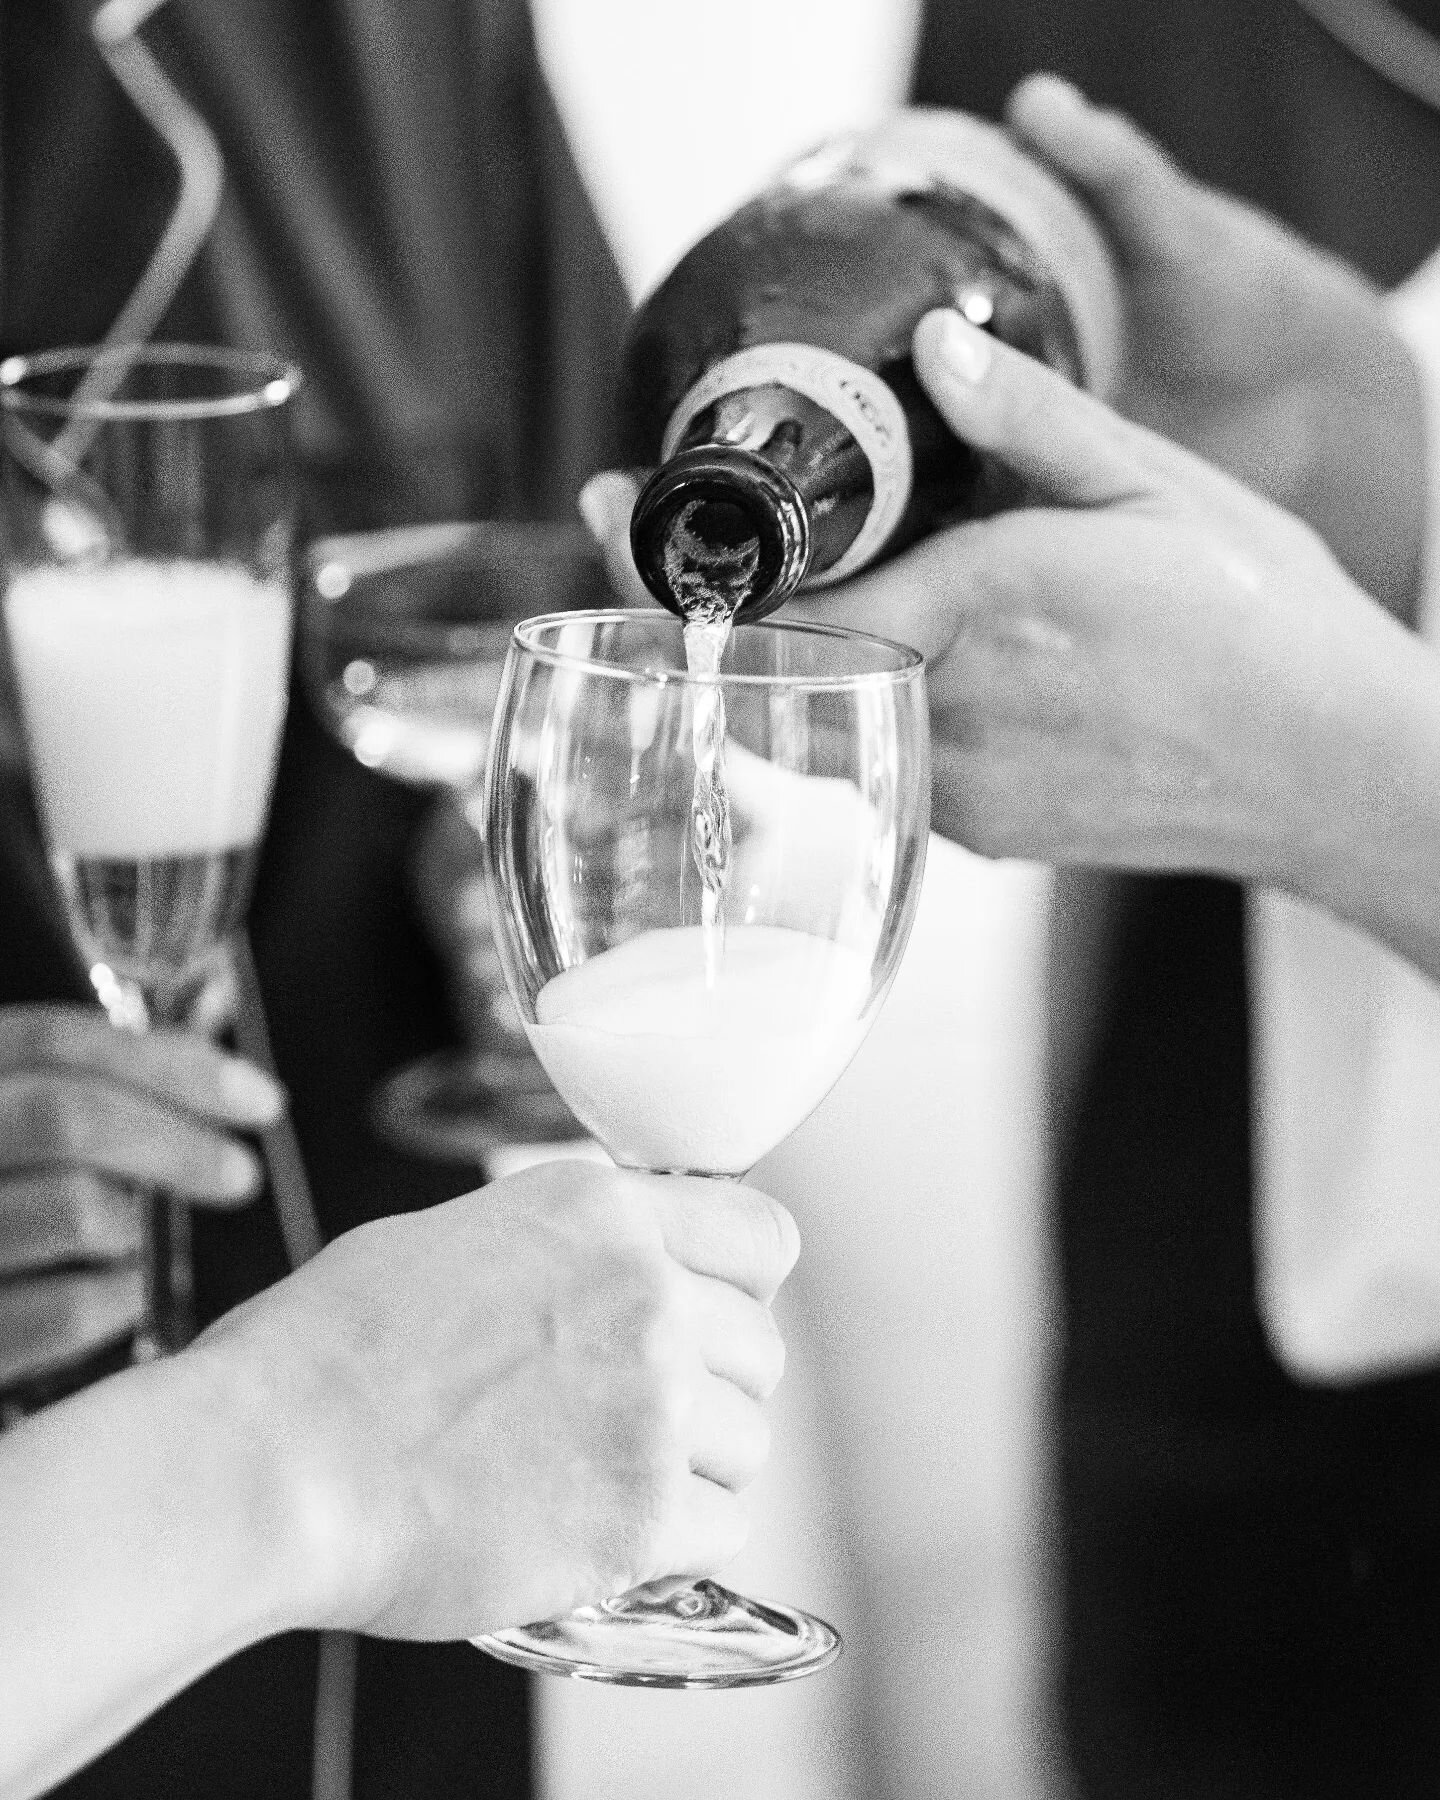 CHEERS TO THE WEEKEND! 🥂

I can't believe it's been almost a week since the gorgeousness of Stephanie &amp; Simon's wedding 💍

So dreamy and full of love and laughter! 

This bride and groom were so loved and it was evident throughout the WHOLE day